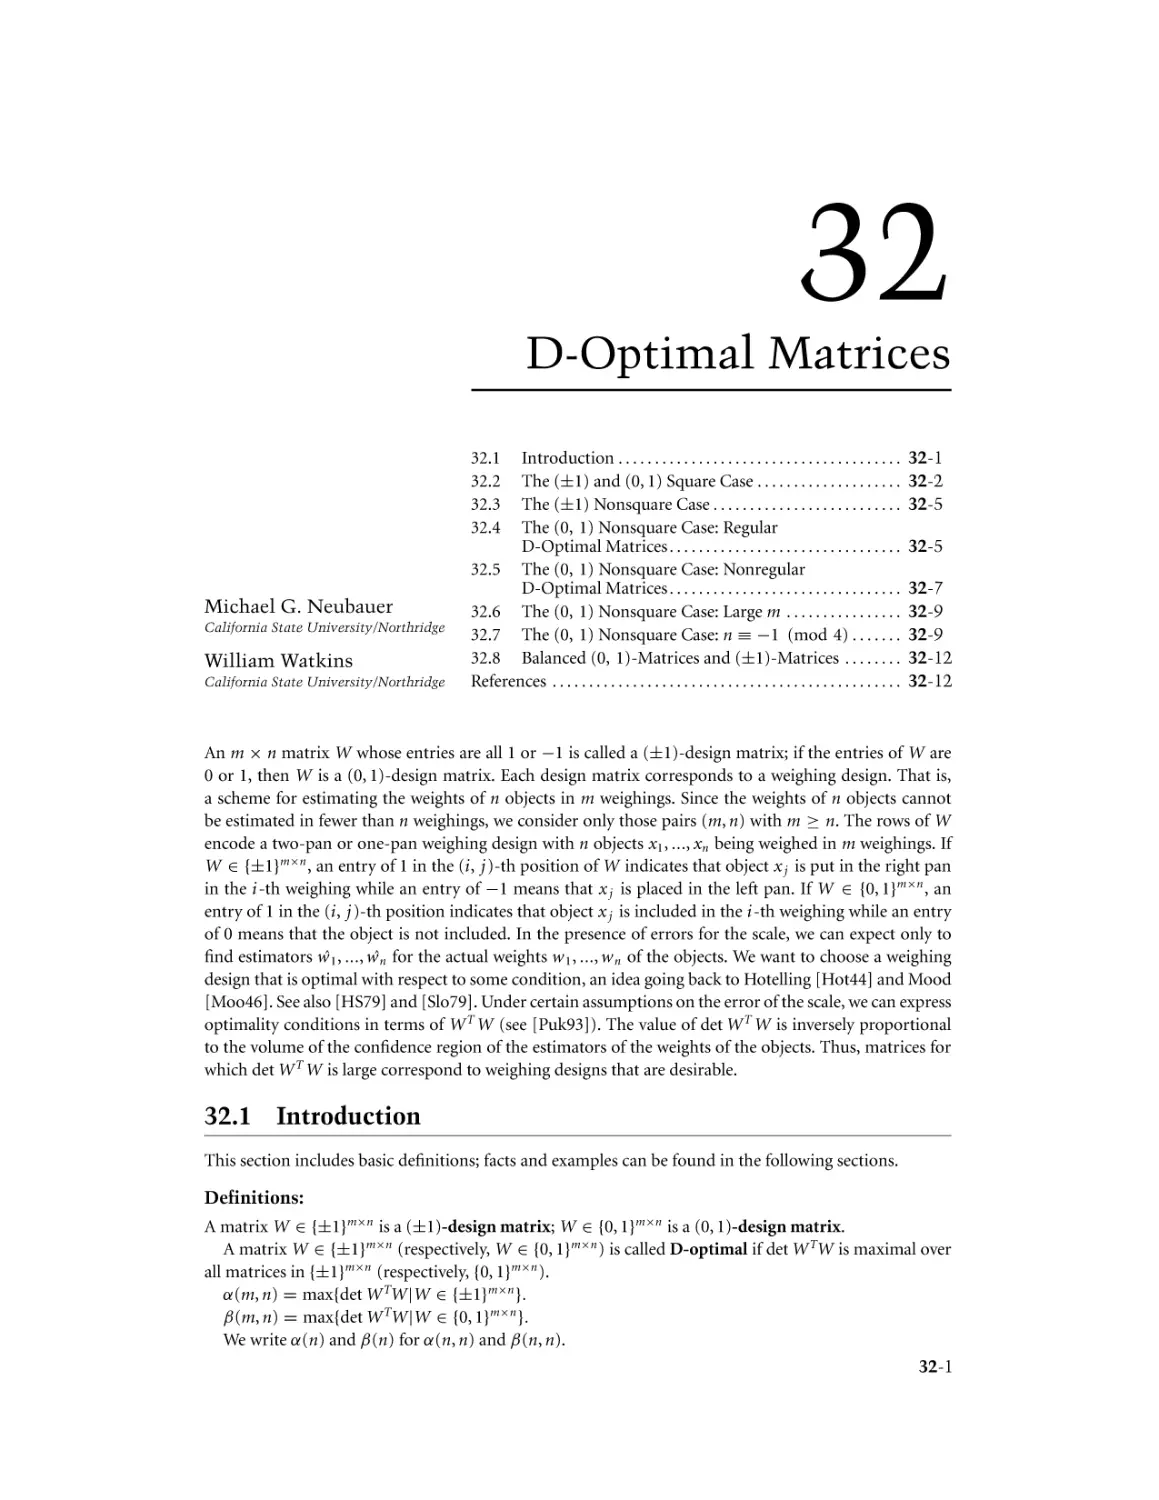 Chapter 32. D-Optimal Matrices